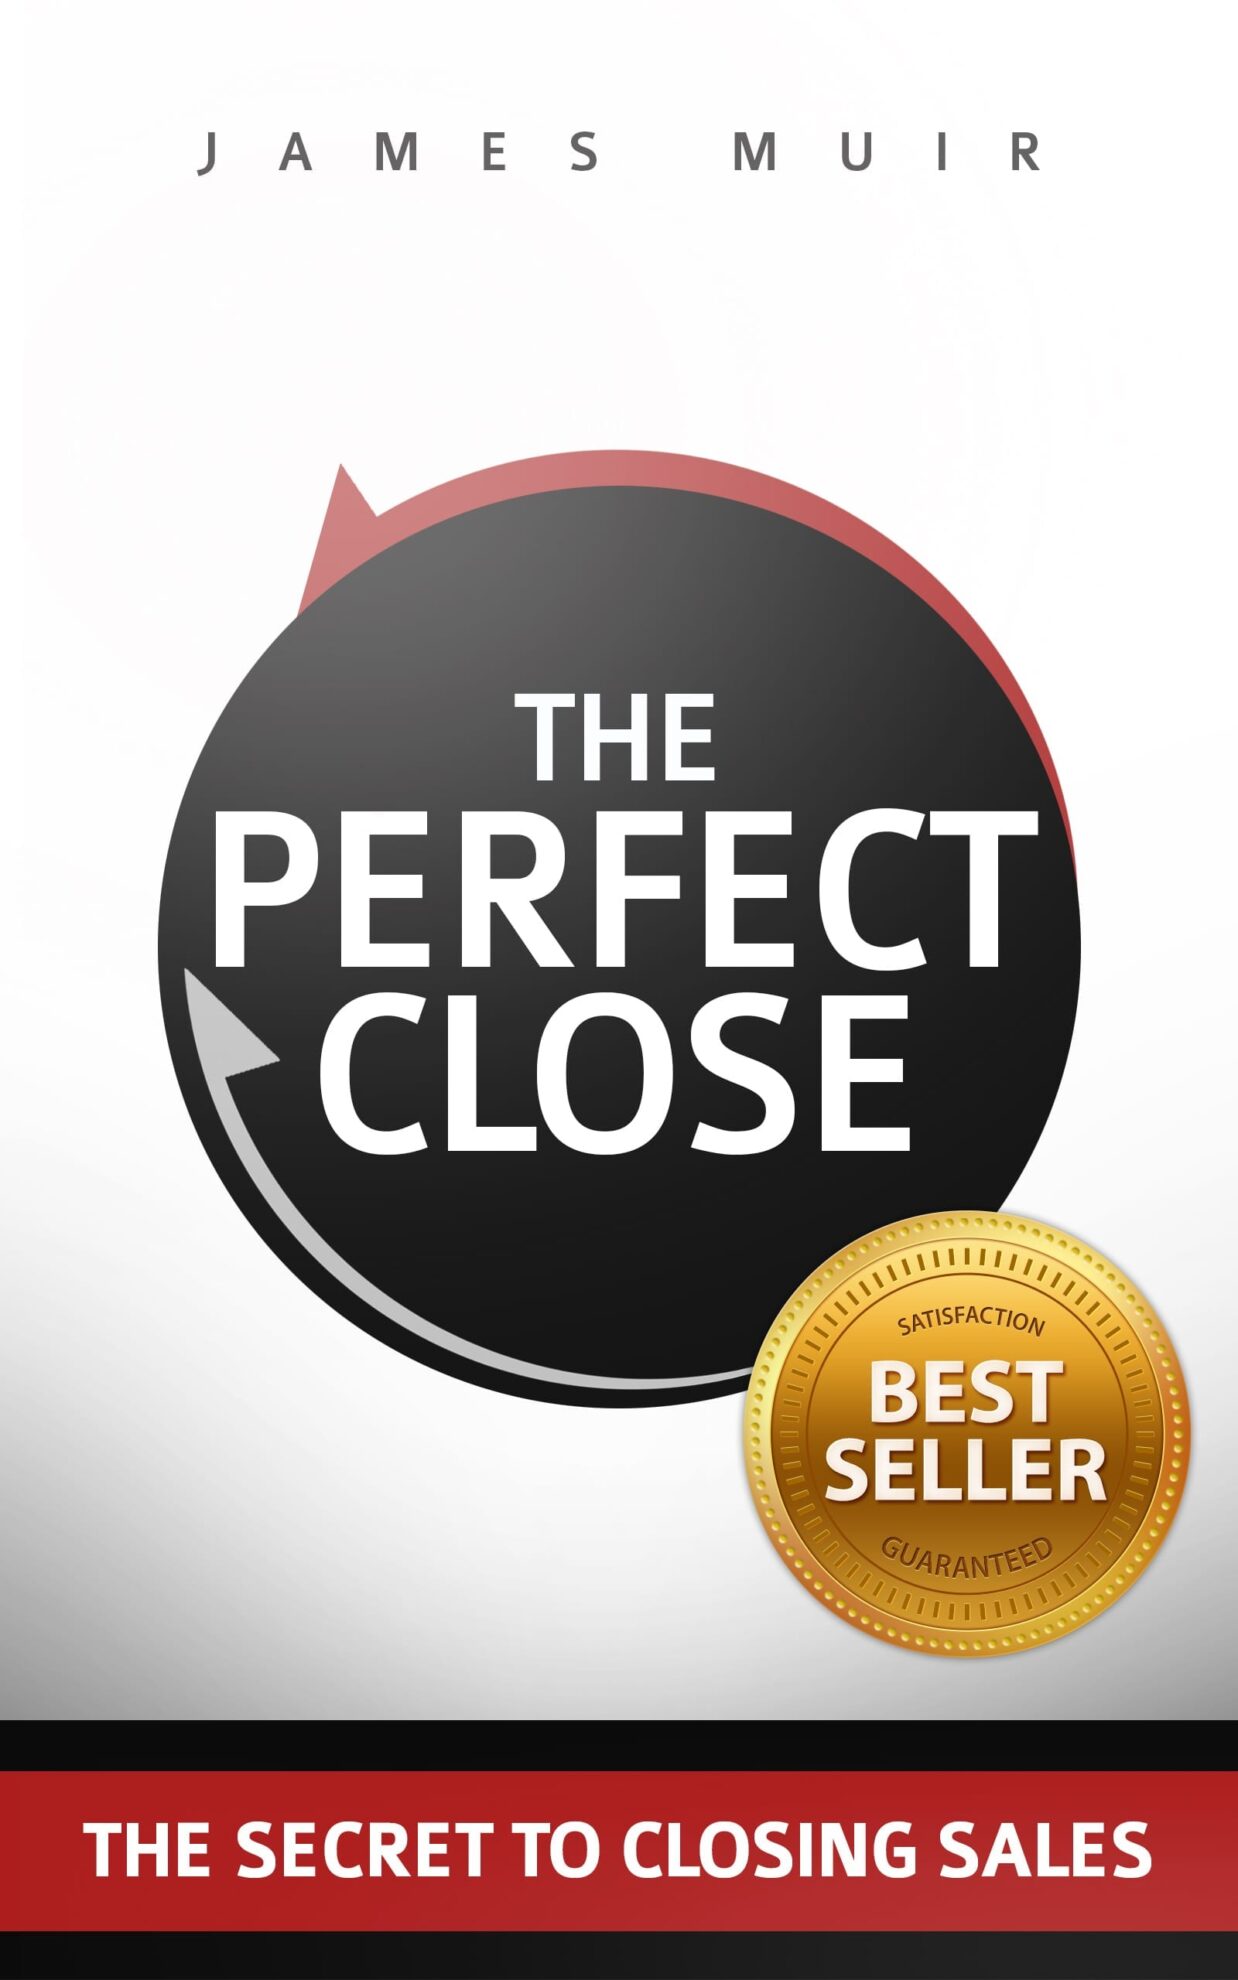 Close for good. The Secrets of closing the sale. Close to perfection. Best closer.